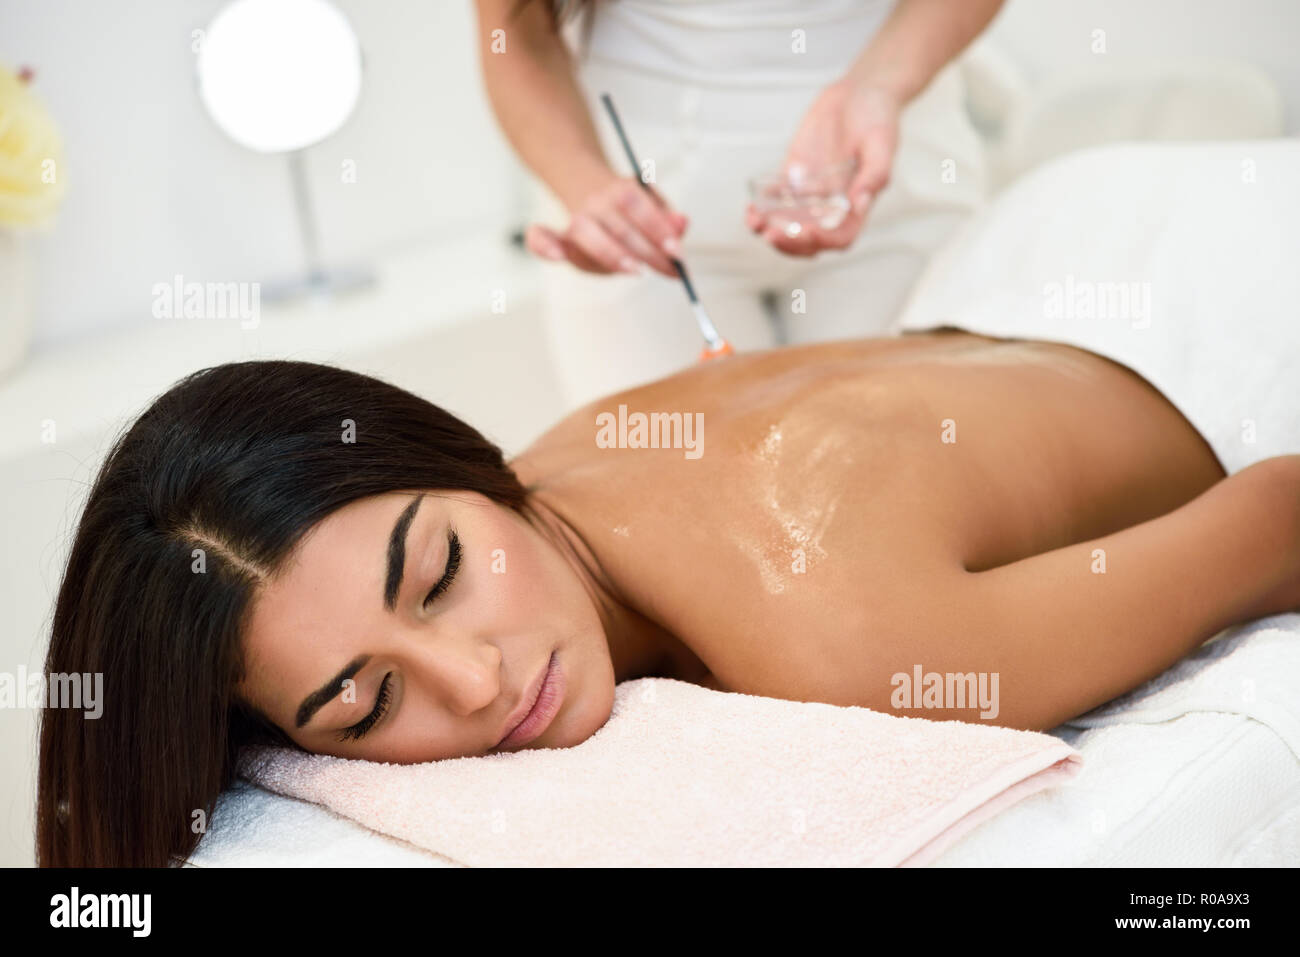 Arab woman receiving back massage treatment with oil brush in spa wellness center. Beauty and Aesthetic concepts. Stock Photo